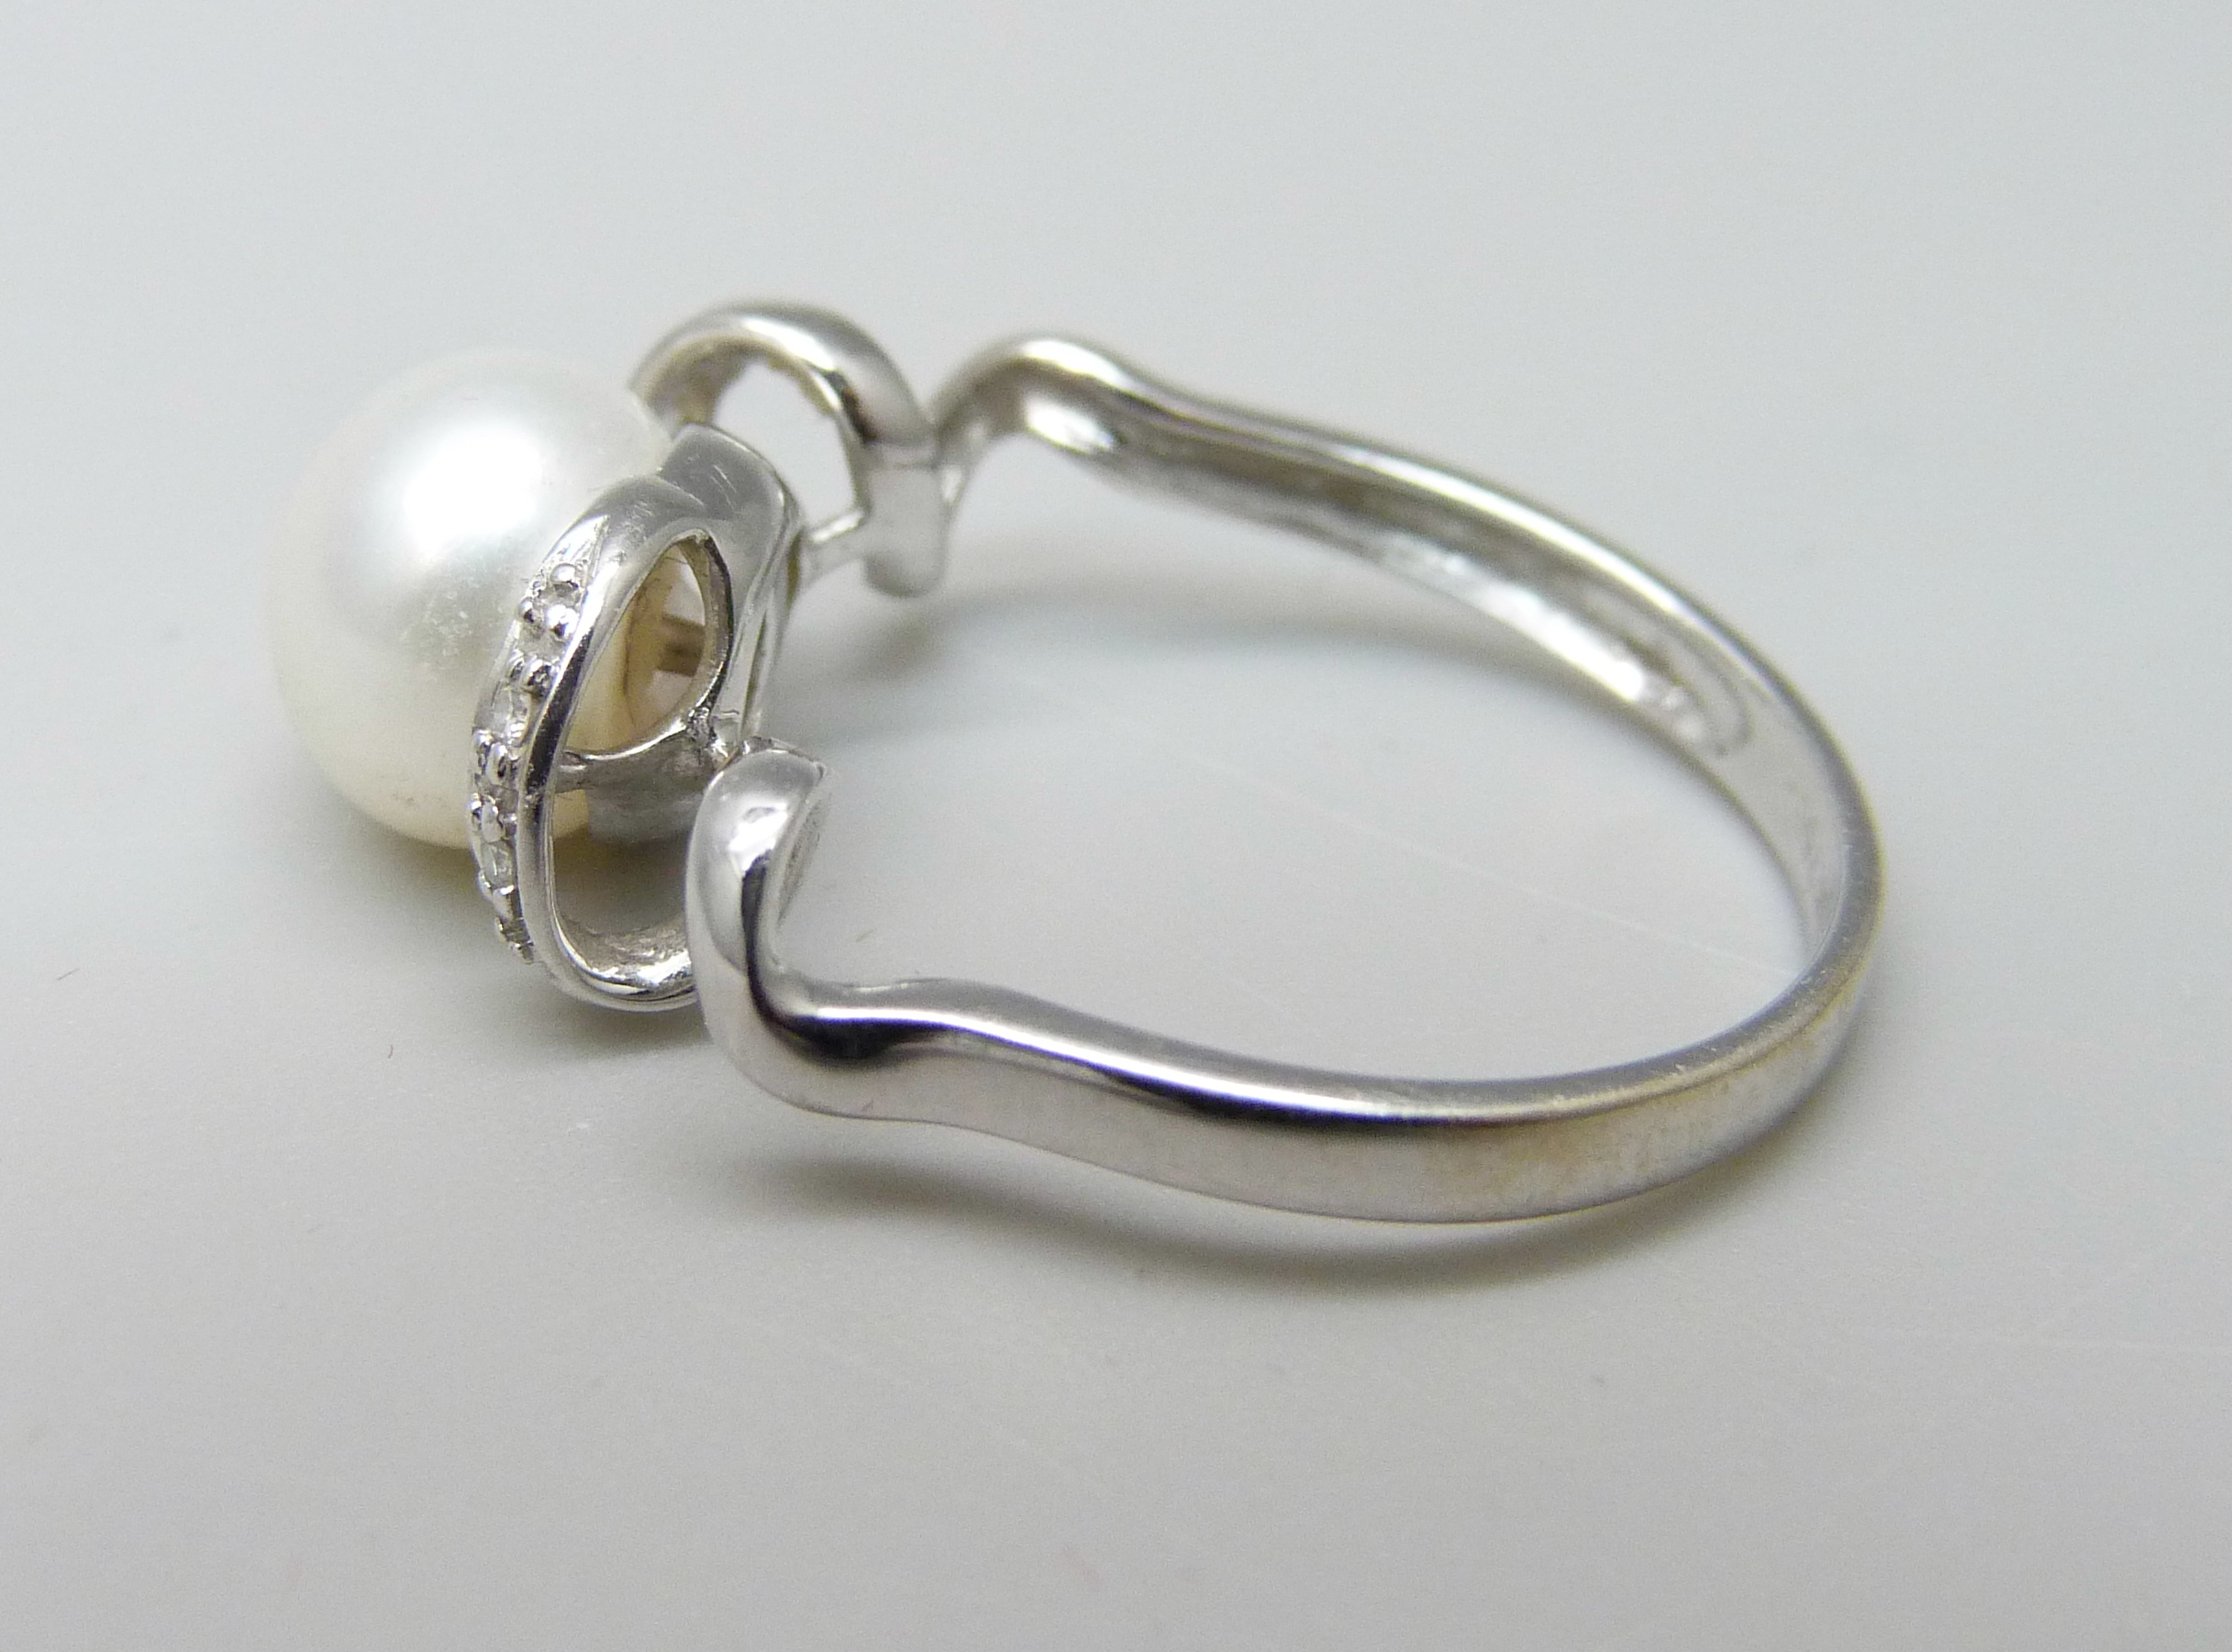 An 18ct white gold, diamond and pearl ring, 2.9g, M/N - Image 2 of 3